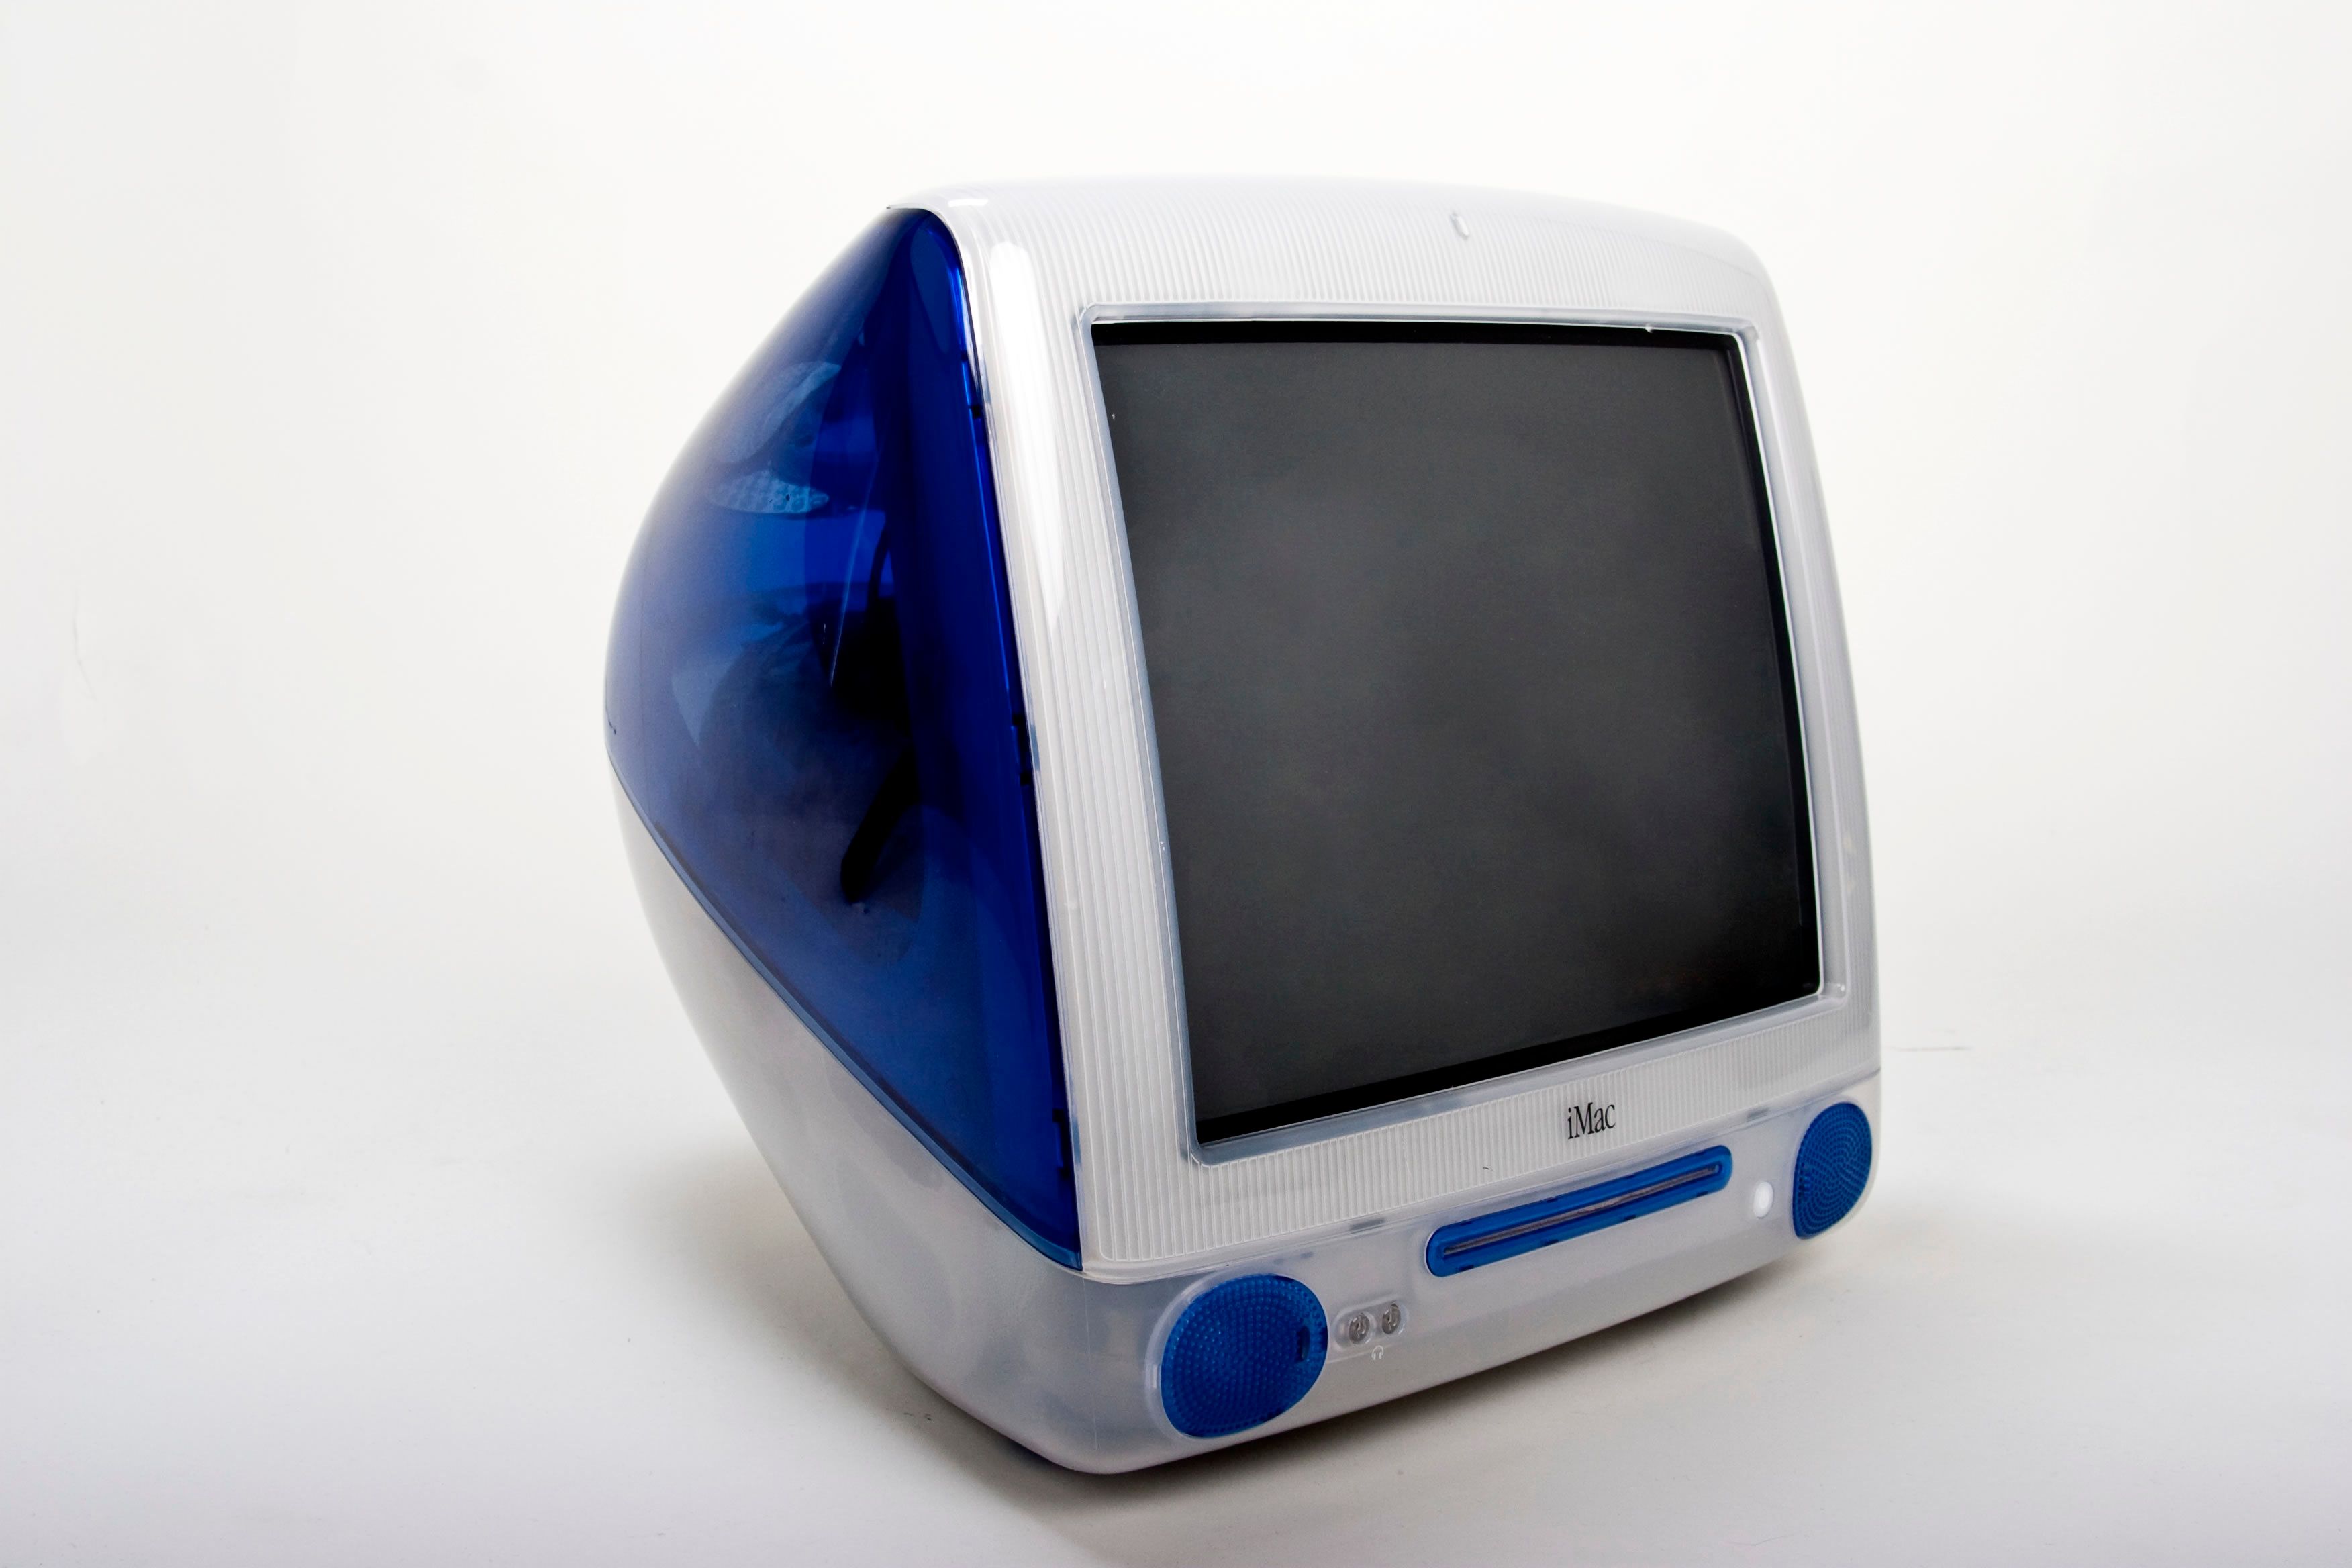 A blue iMac G3 is displayed against a white background at a 3/4 angle